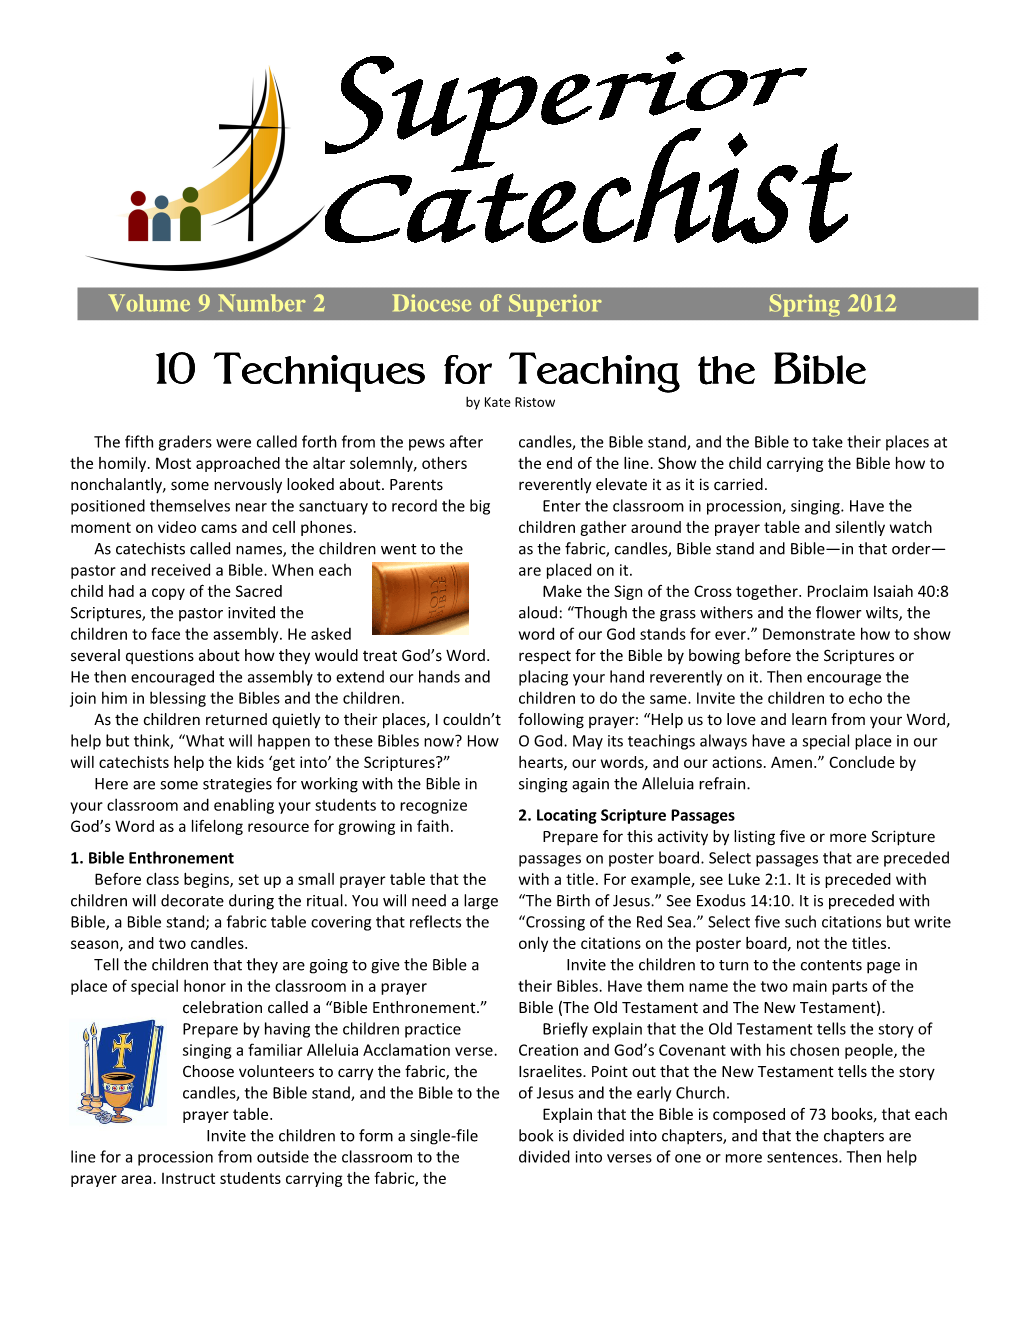 10 Techniques for Teaching the Bible 10